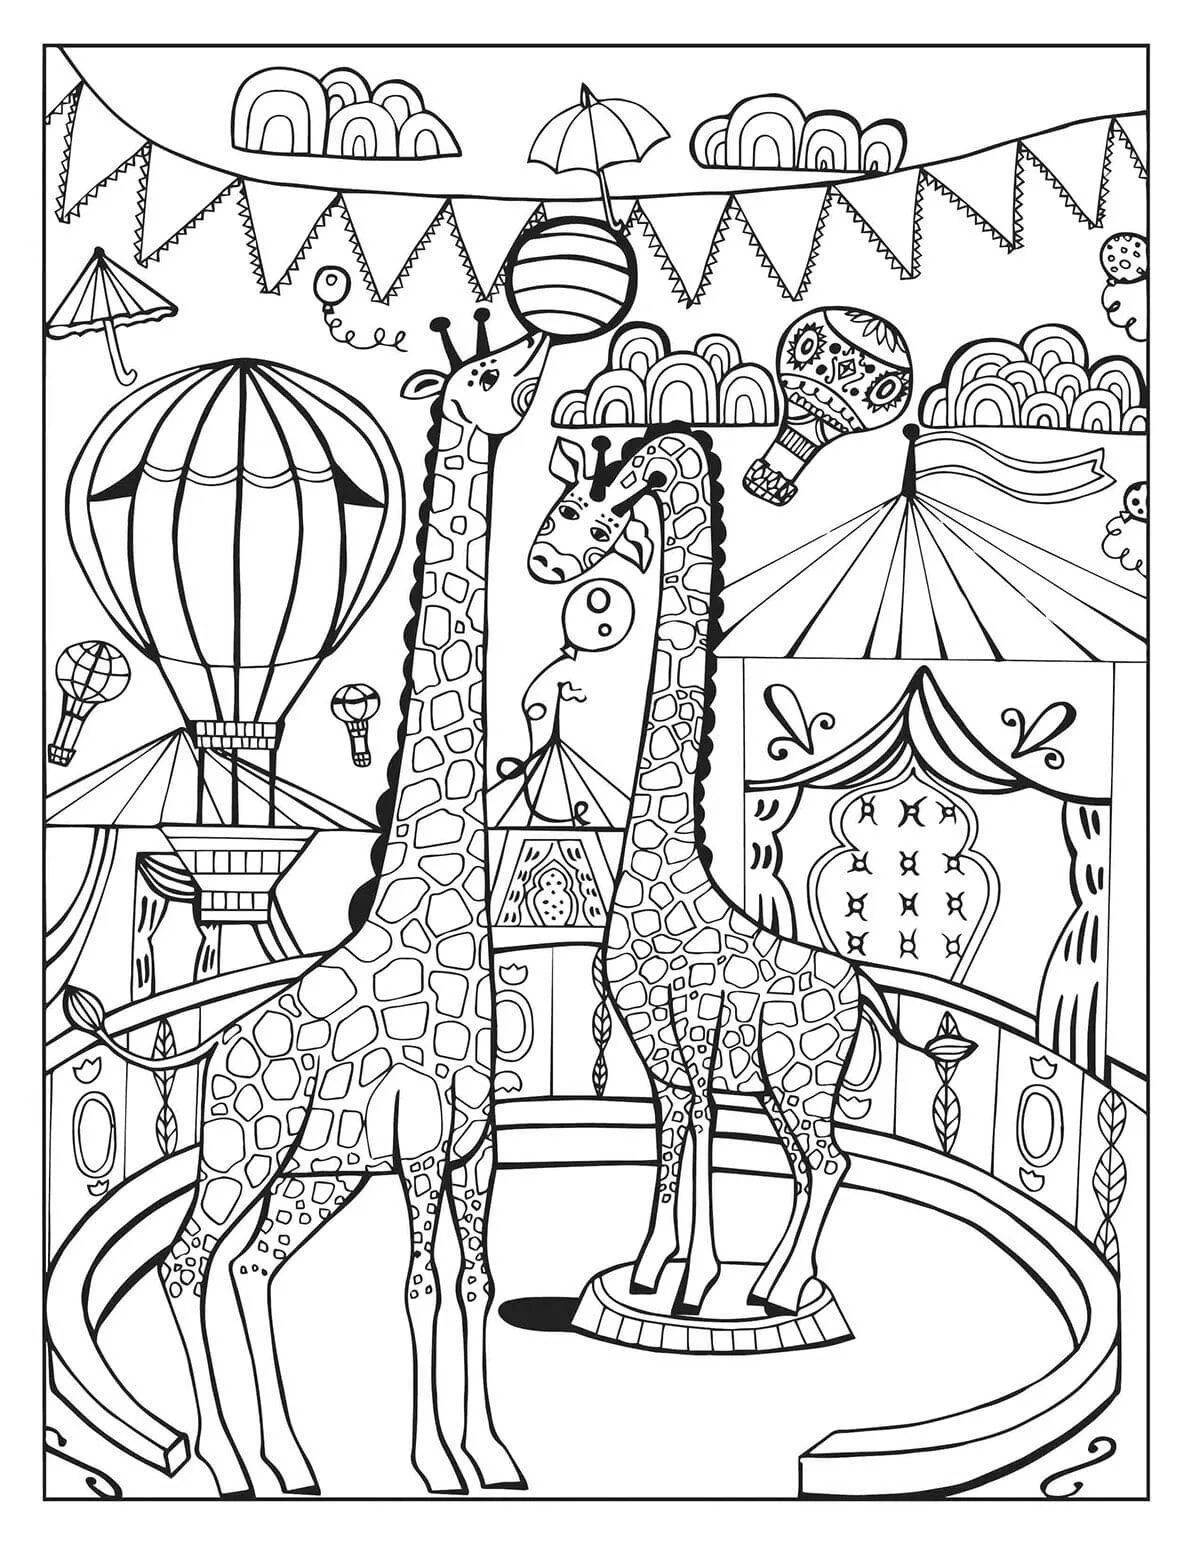 Amazing circus coloring book for kids